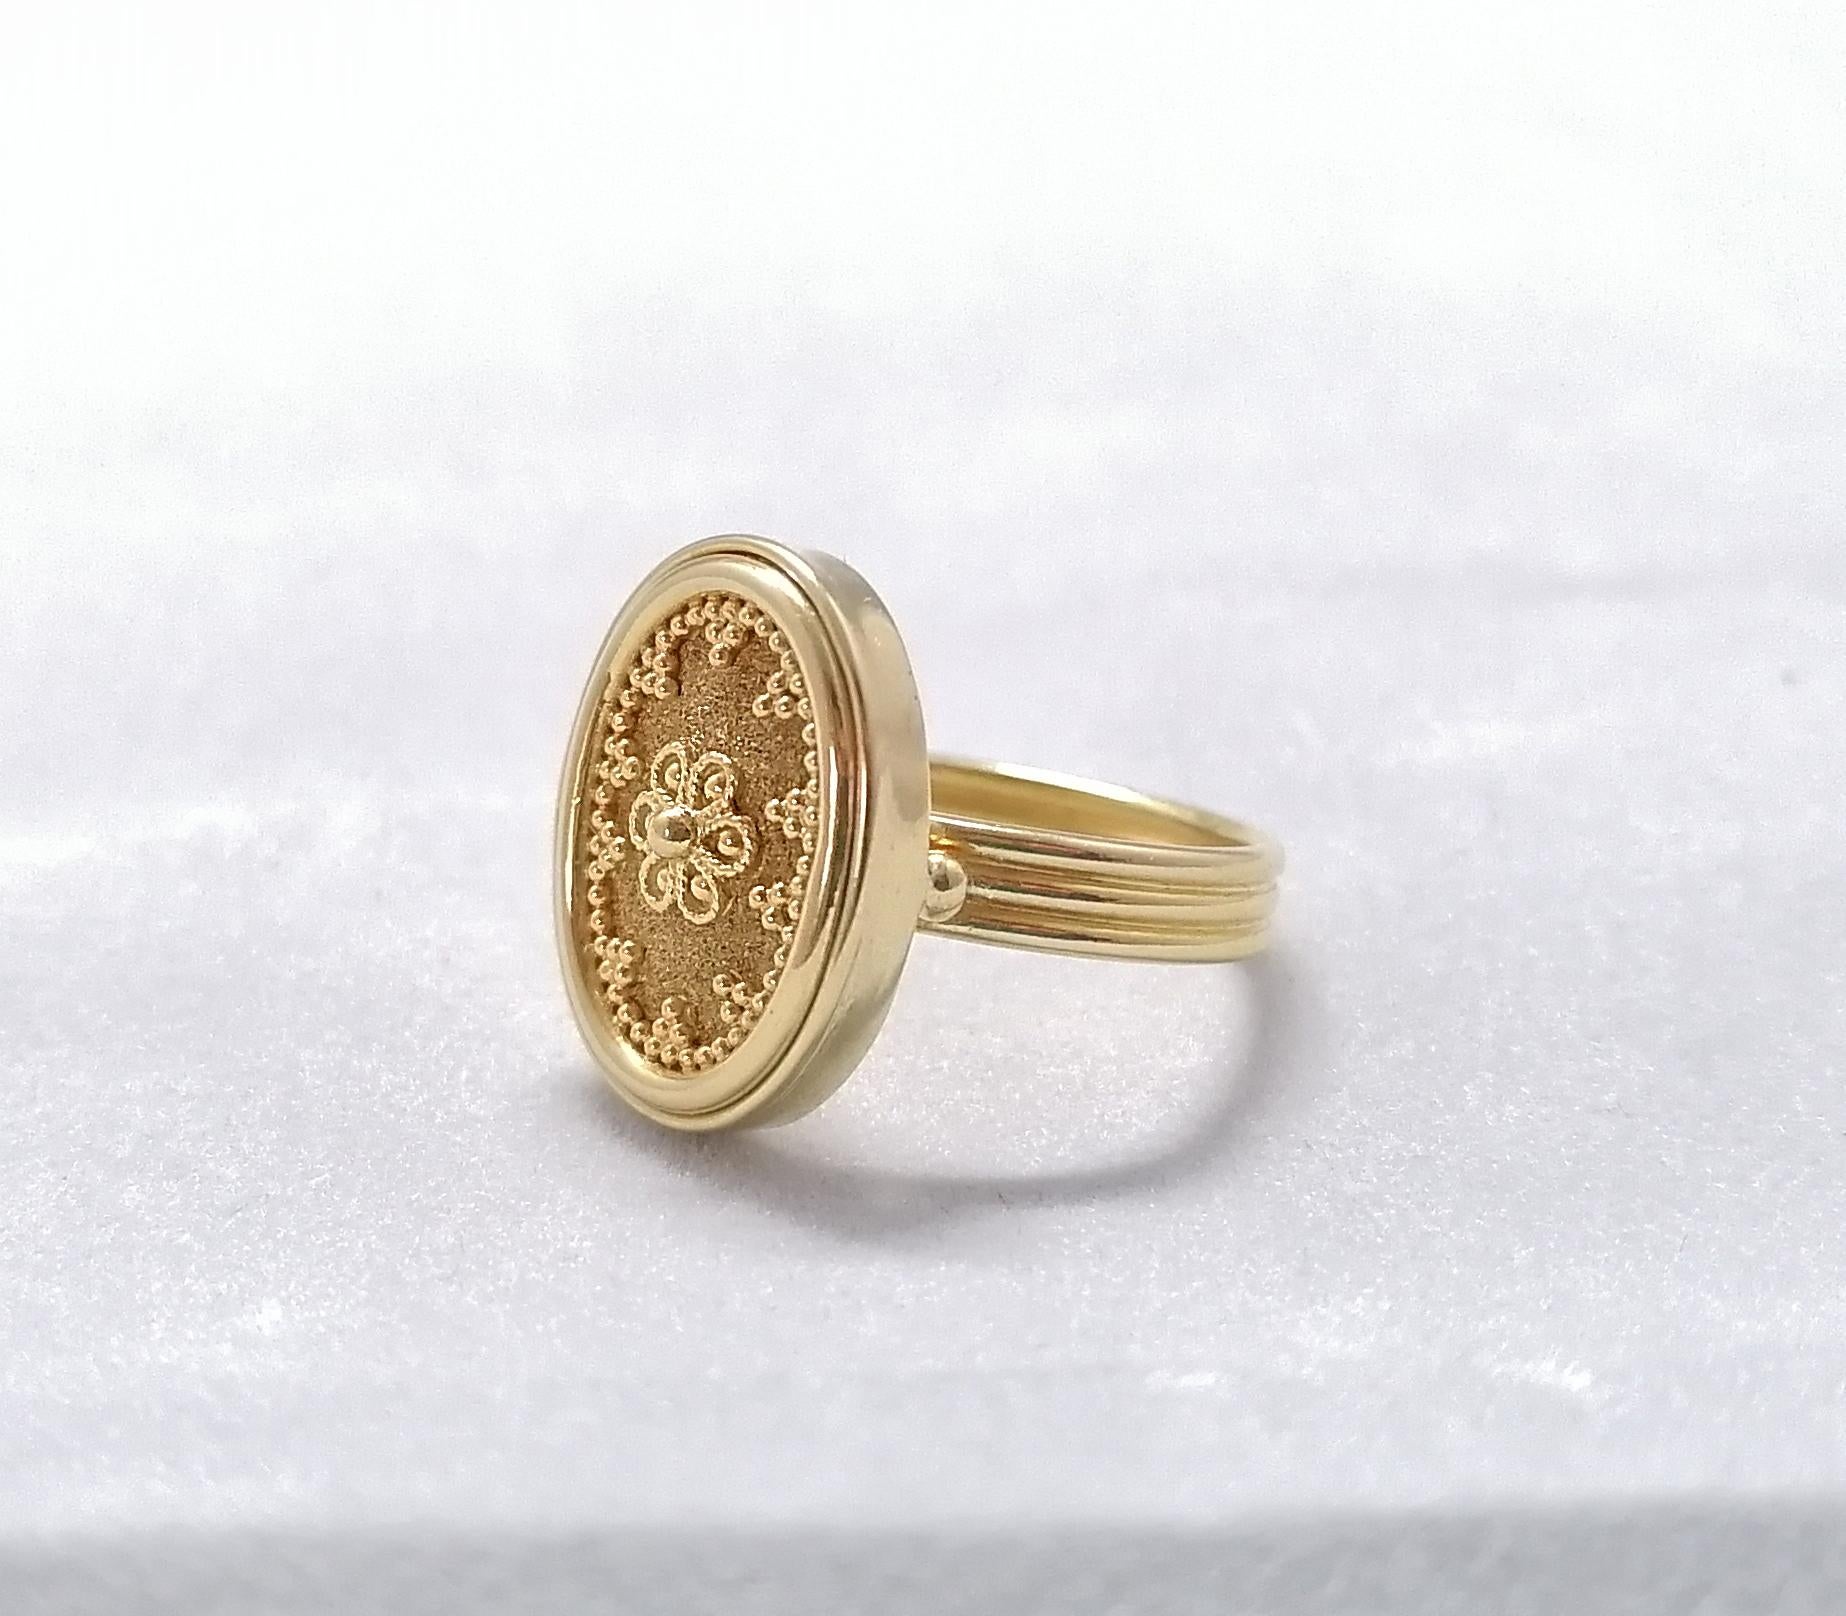 This elegant S.Georgios designer oval ring is handmade from solid 18 Karat Yellow Gold. This gorgeous oval ring is microscopically decorated with Byzantine-style granulation work to create a stunning and delicate floral art piece.
We also make this